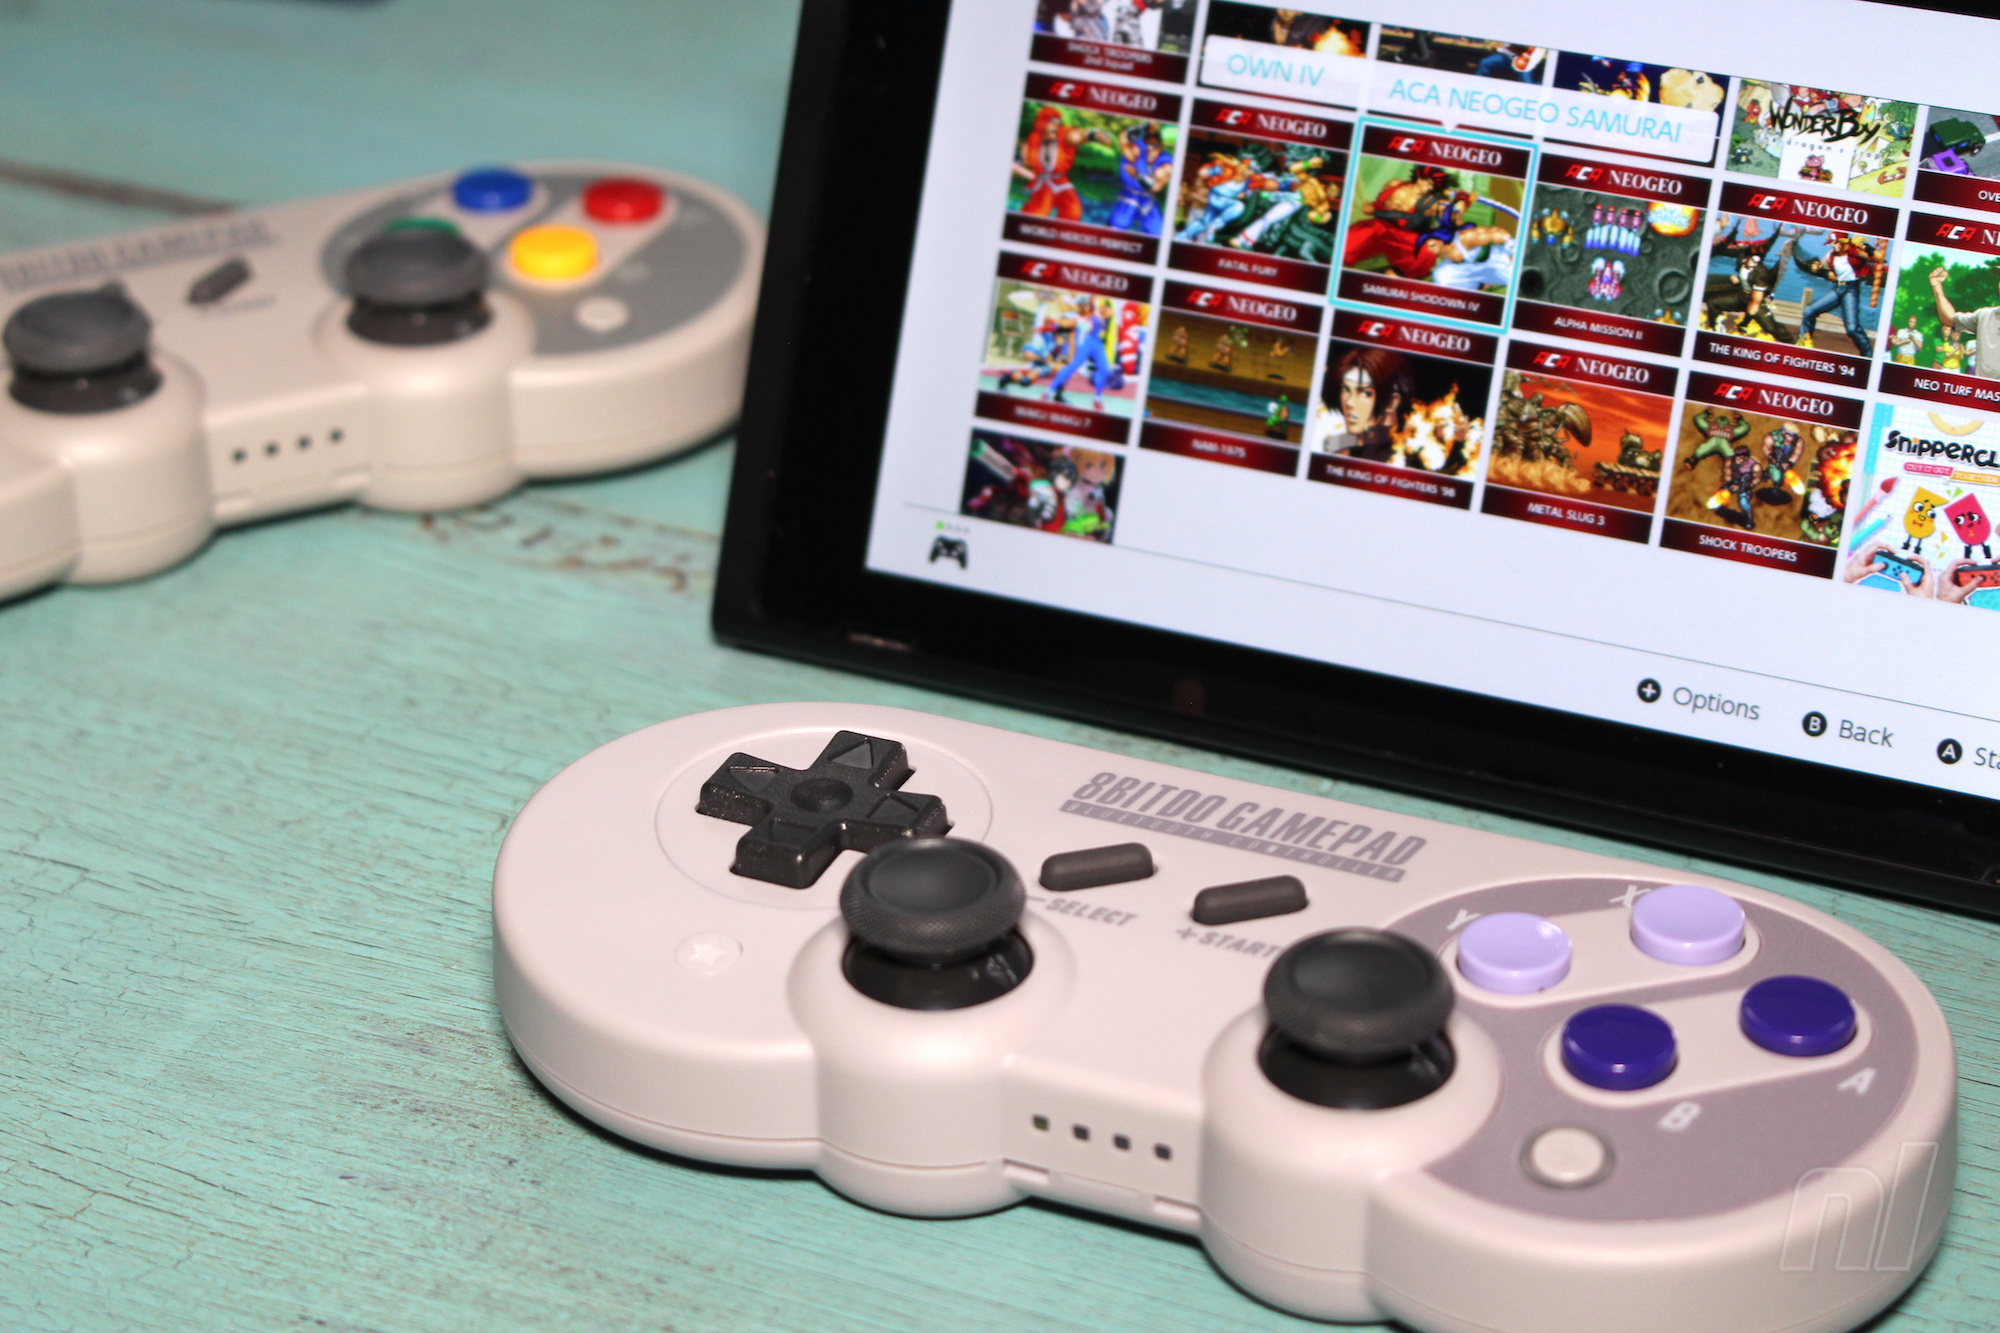 Hardware Review 8bitdo Sn30 Pro Gamepad The Best Switch Pro Controller Nintendo Life